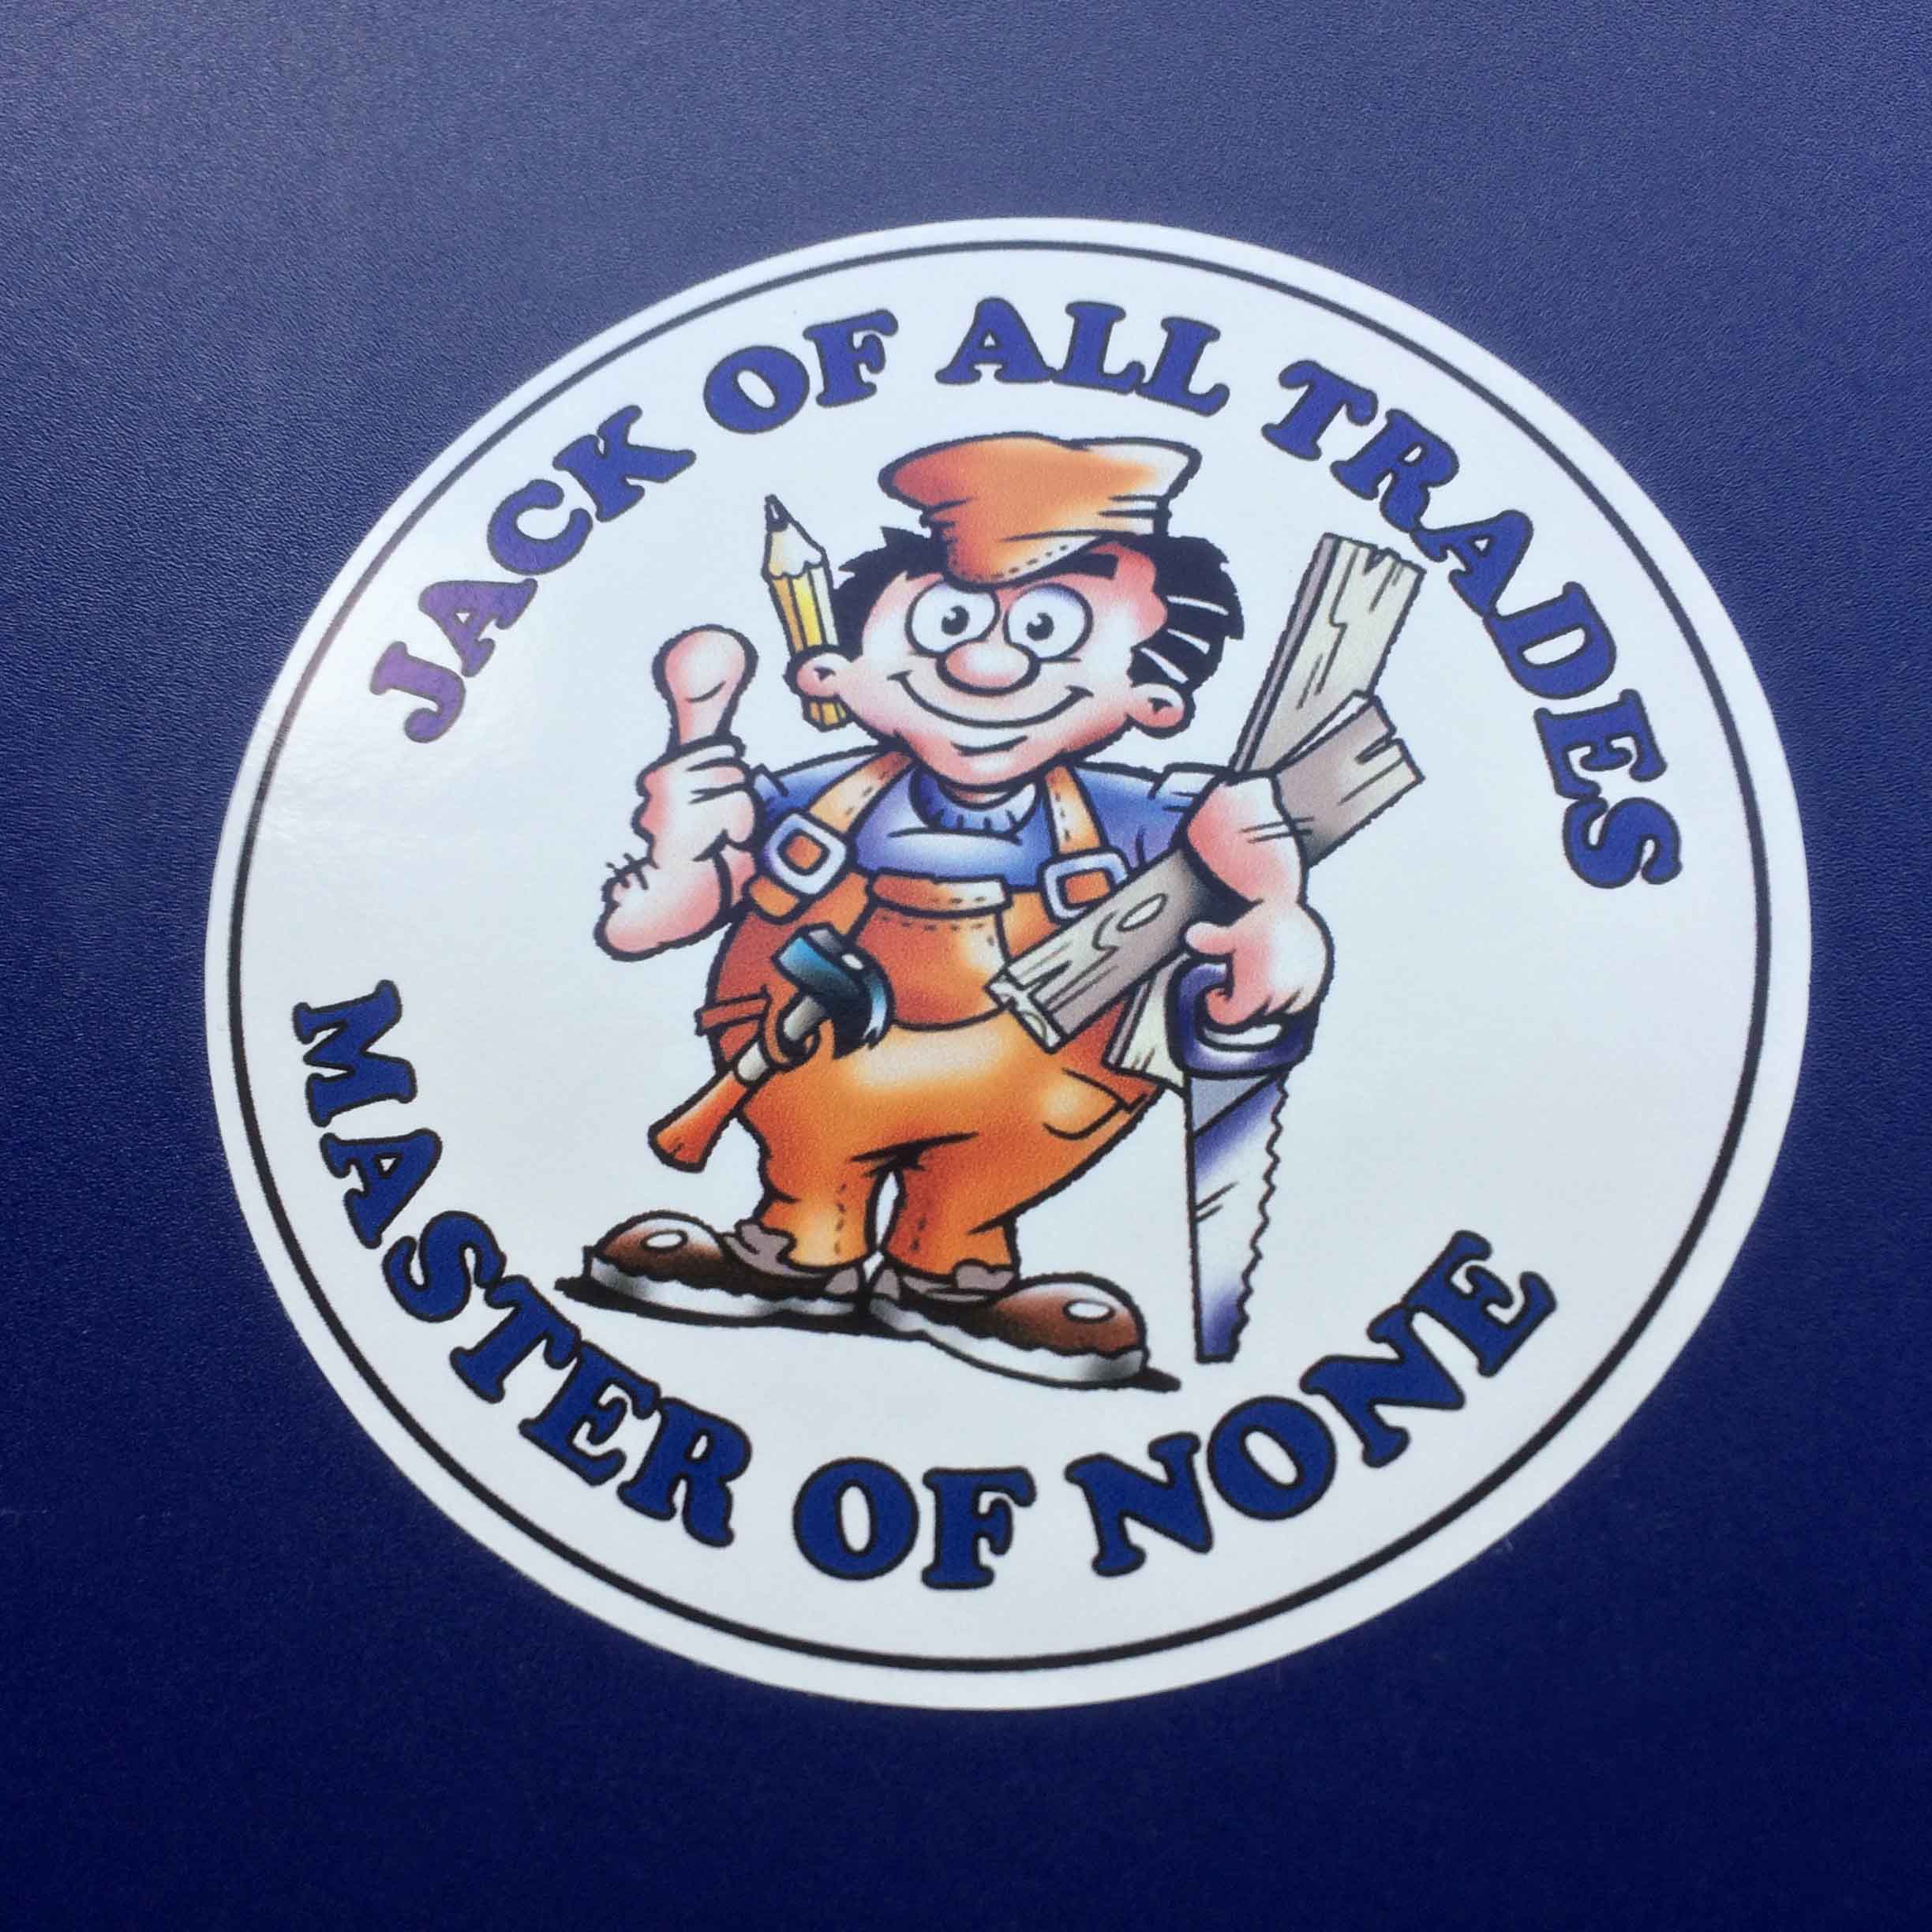 Jack Of All Trades Master Of None in blue lettering surrounds a humorous cartoon character of a man. He is wearing a blue shirt, brown cap with a pencil behind one ear, boots and dungarees. He is carrying wood, a saw and a hammer.